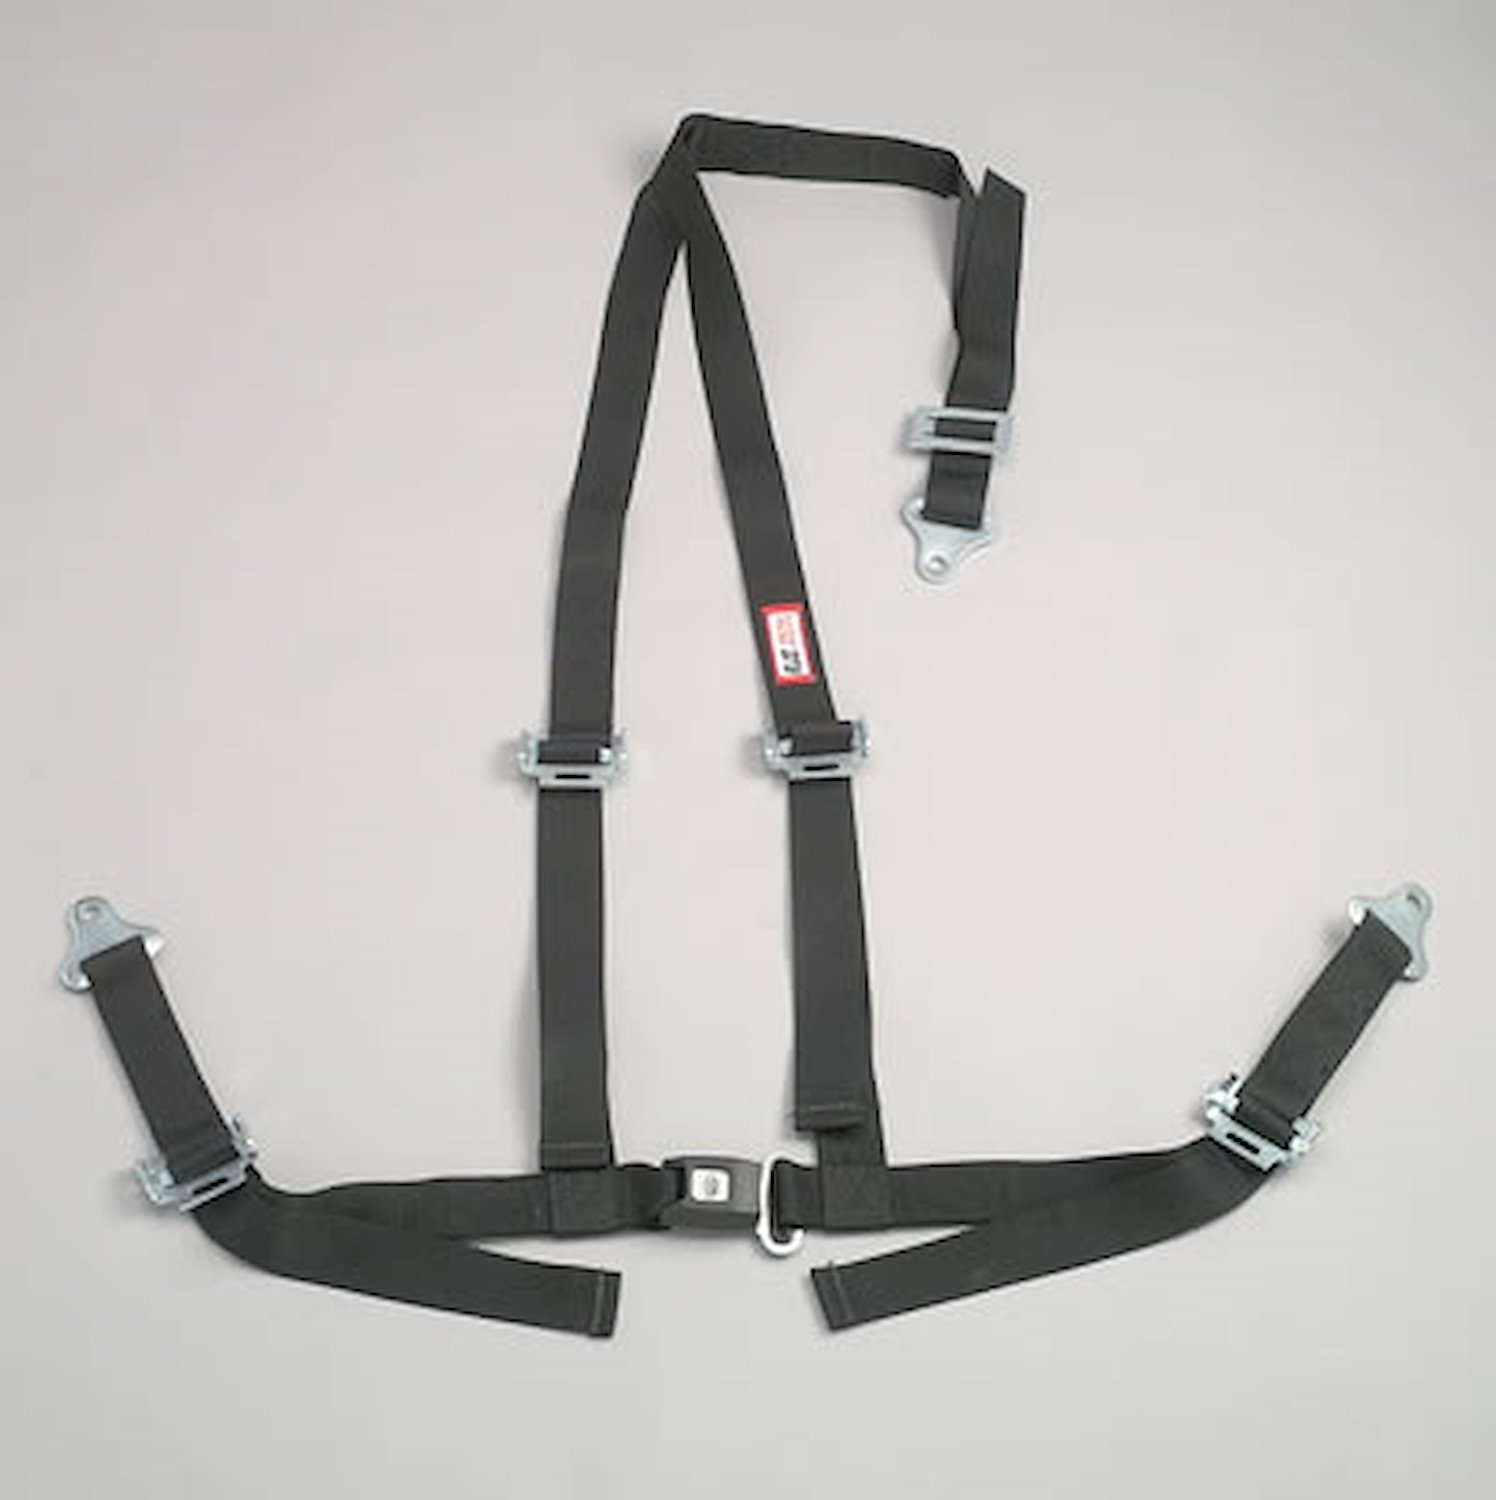 NON-SFI B&T HARNESS 2 PULL DOWN Lap Belt SNAP 2 S. H. Individual FLOOR Mount WRAP/BOLT w/STERNUM STRAP RED